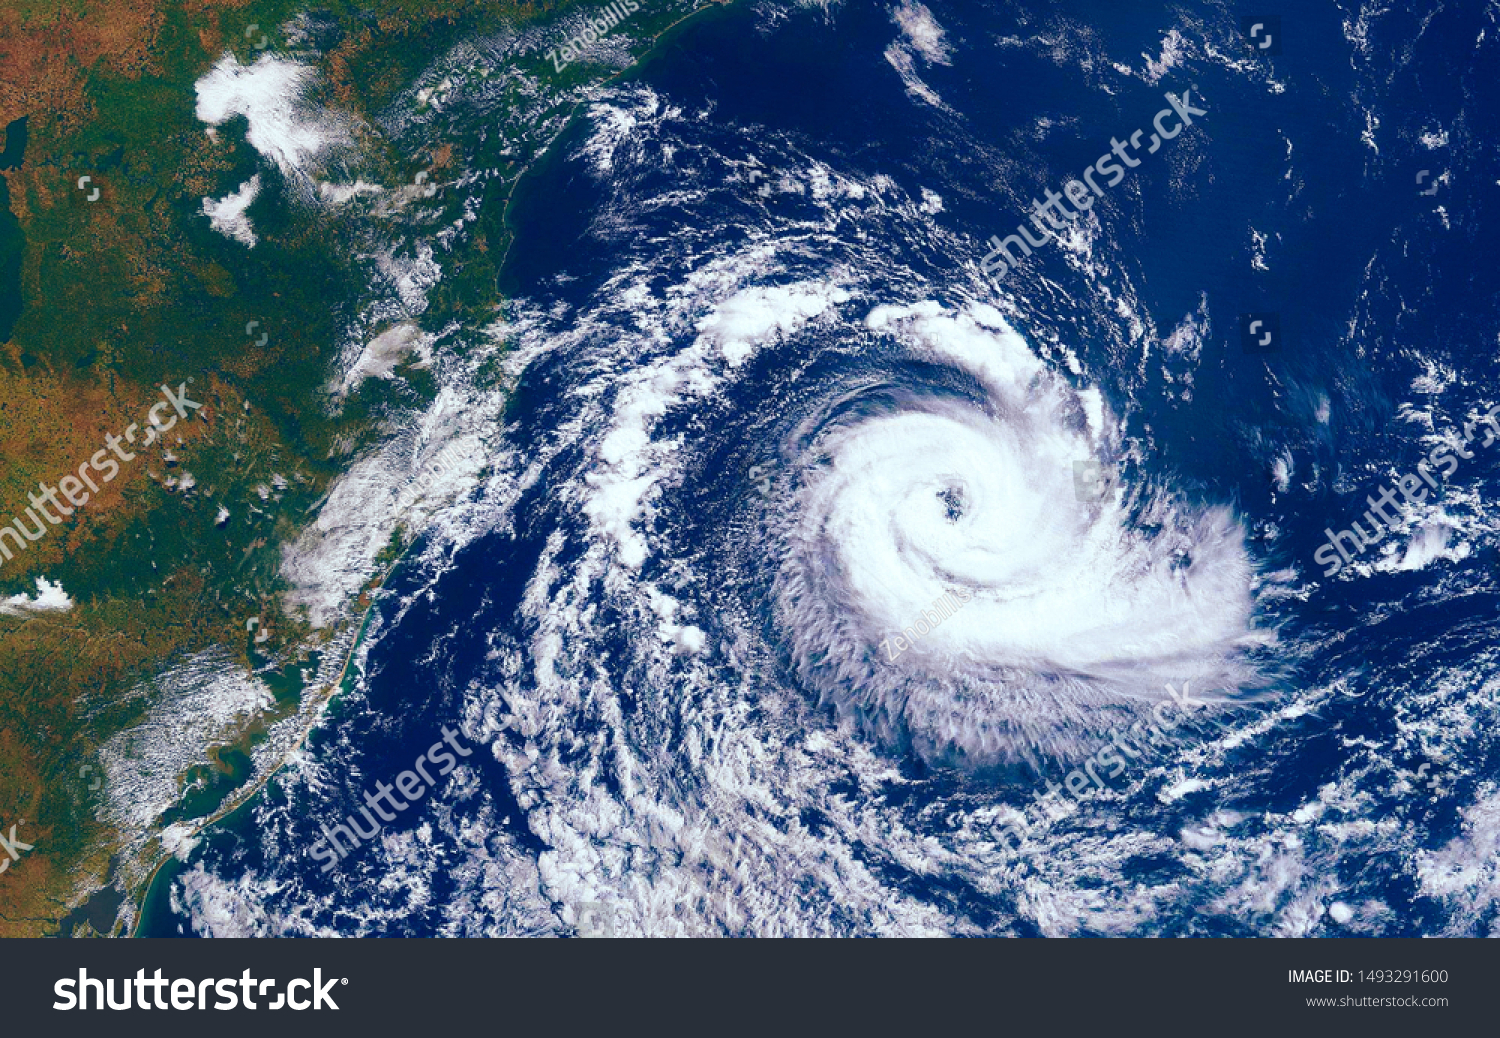 Category 5 super typhoon approaching the coast. The eye of the hurricane. View from outer space  Some elements of this image furnished by NASA #1493291600